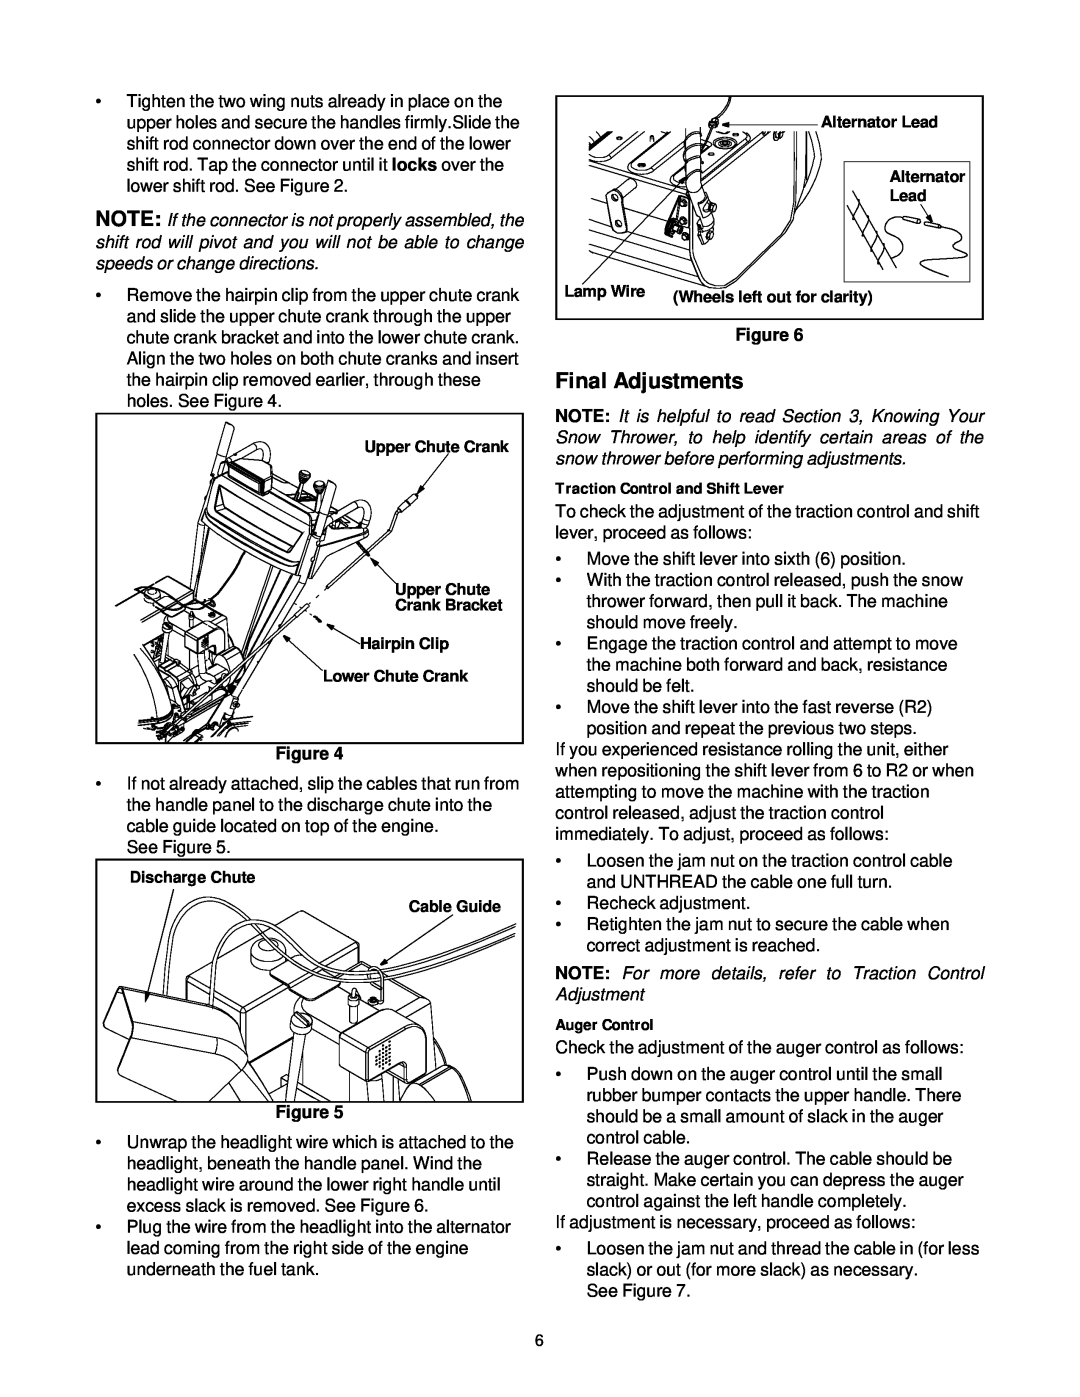 Yard-Man 31AE993J401 manual Final Adjustments, Traction Control and Shift Lever, Auger Control, Figure 